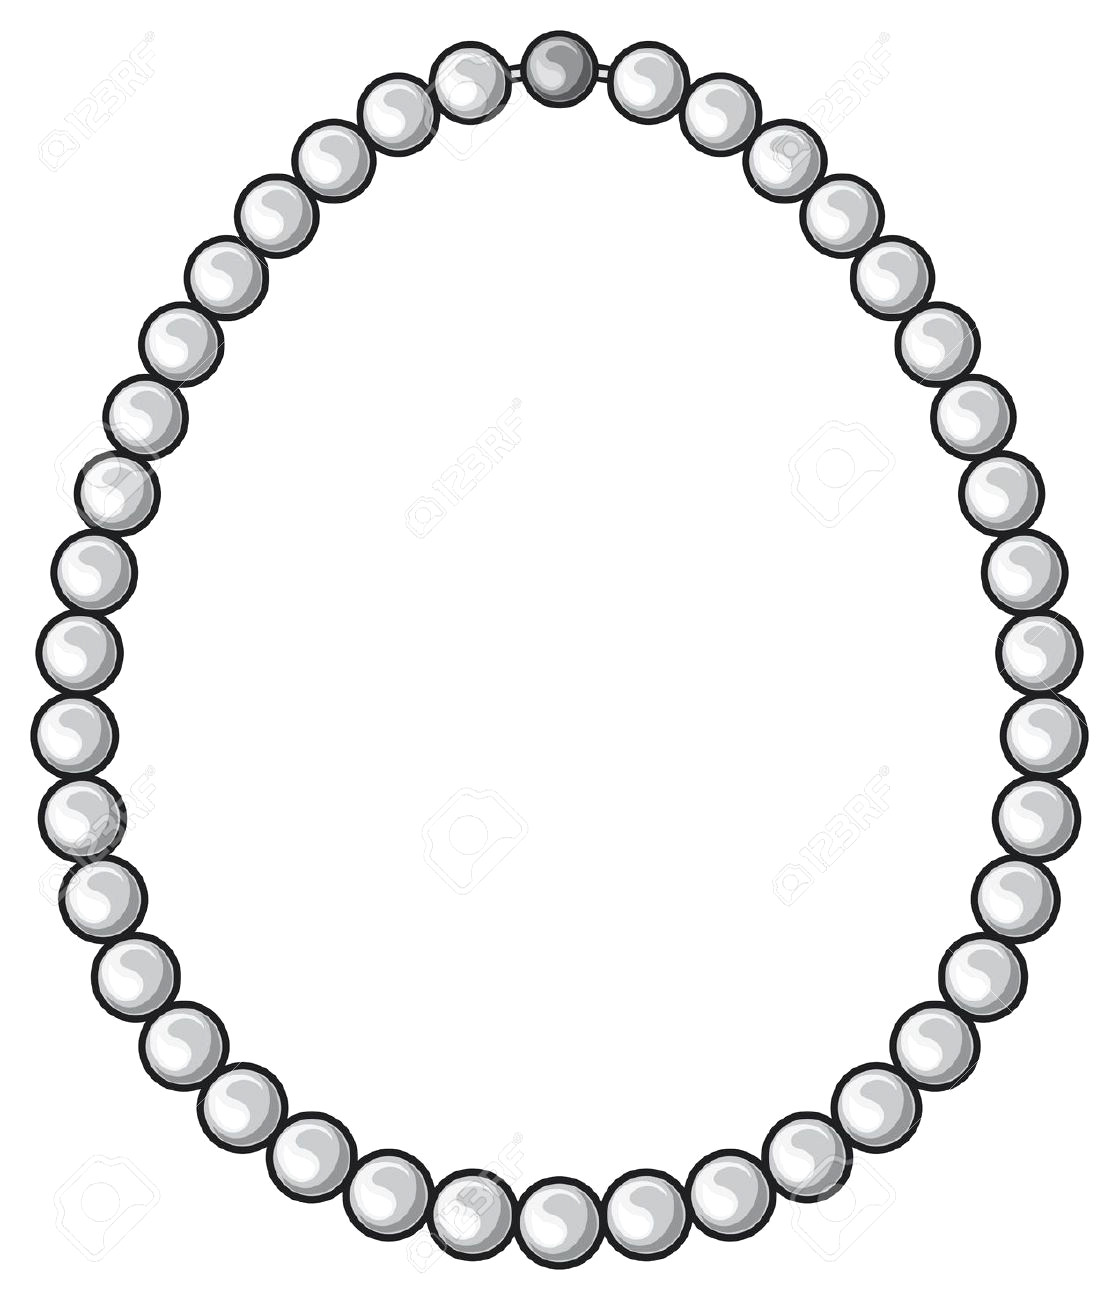 Pearl clipart. Elegant of necklace black